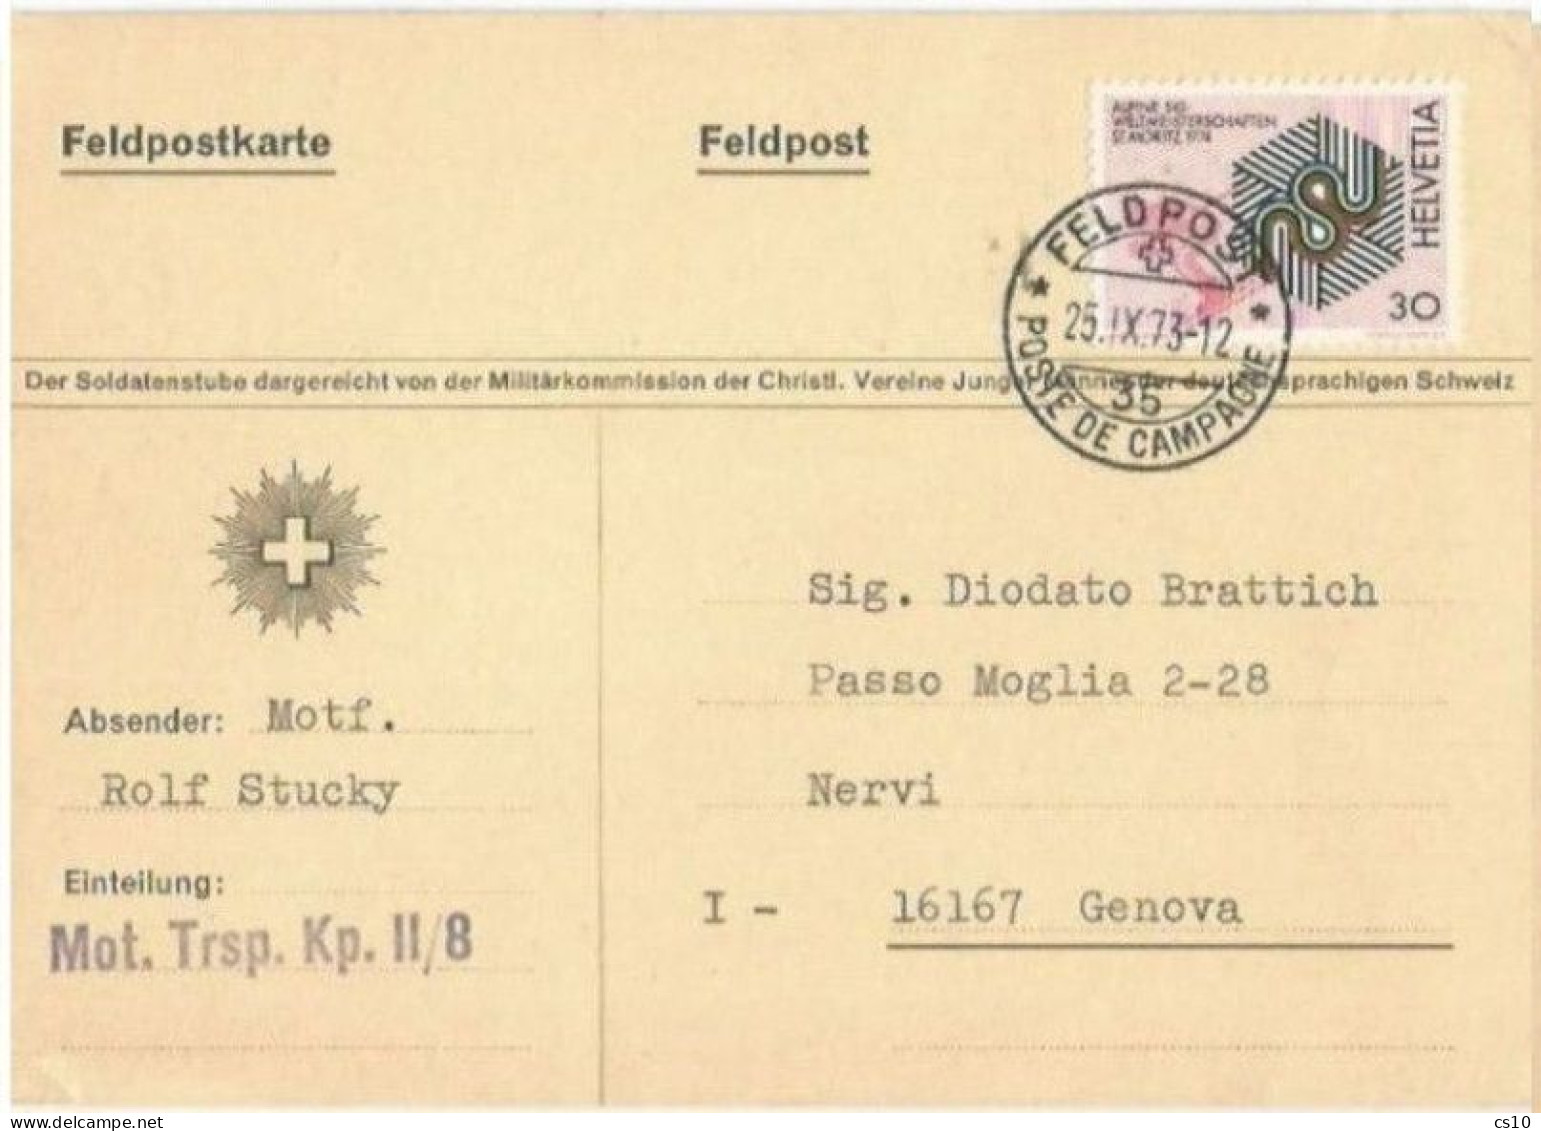 Suisse Feldpost Karte With Timbre-poste C30 Annulé Feldpost - Poste De Campagne 25nov1973 To Italy - REAL MILITAR MAIL - Dokumente